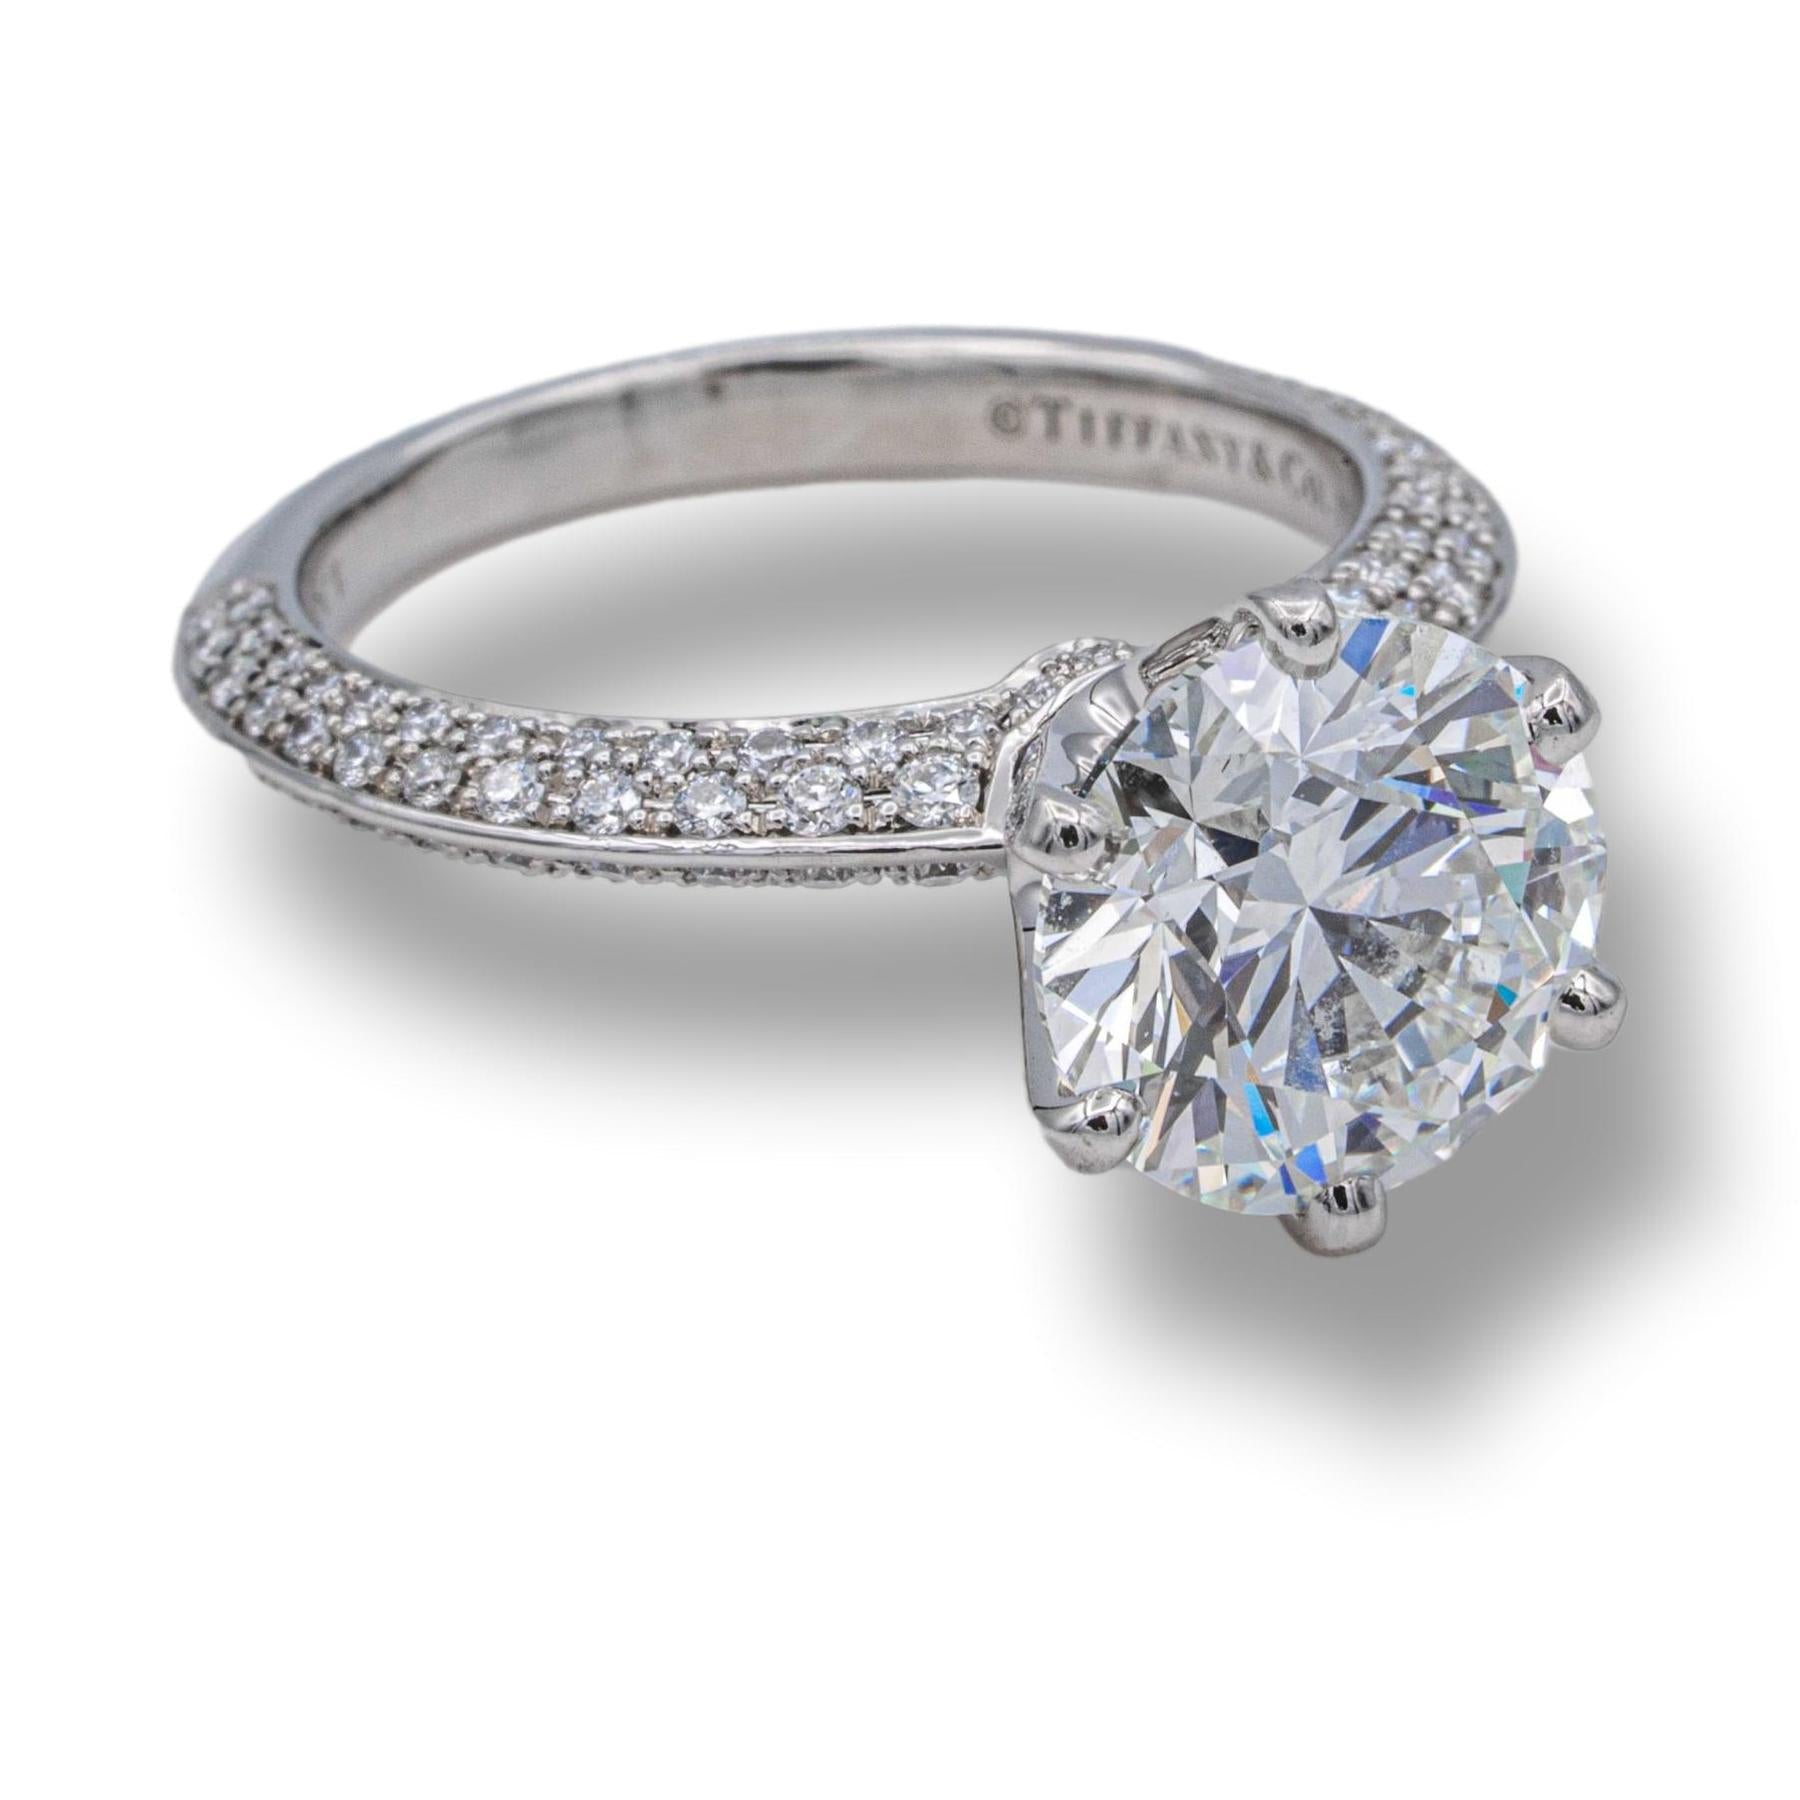 Tiffany & Co. Engagement Rings | Pre-Owned / Used Classic Rings Price |  Tiffany'S Diamond And Gold Rings For Women | Page 2 | The Diamond Oak